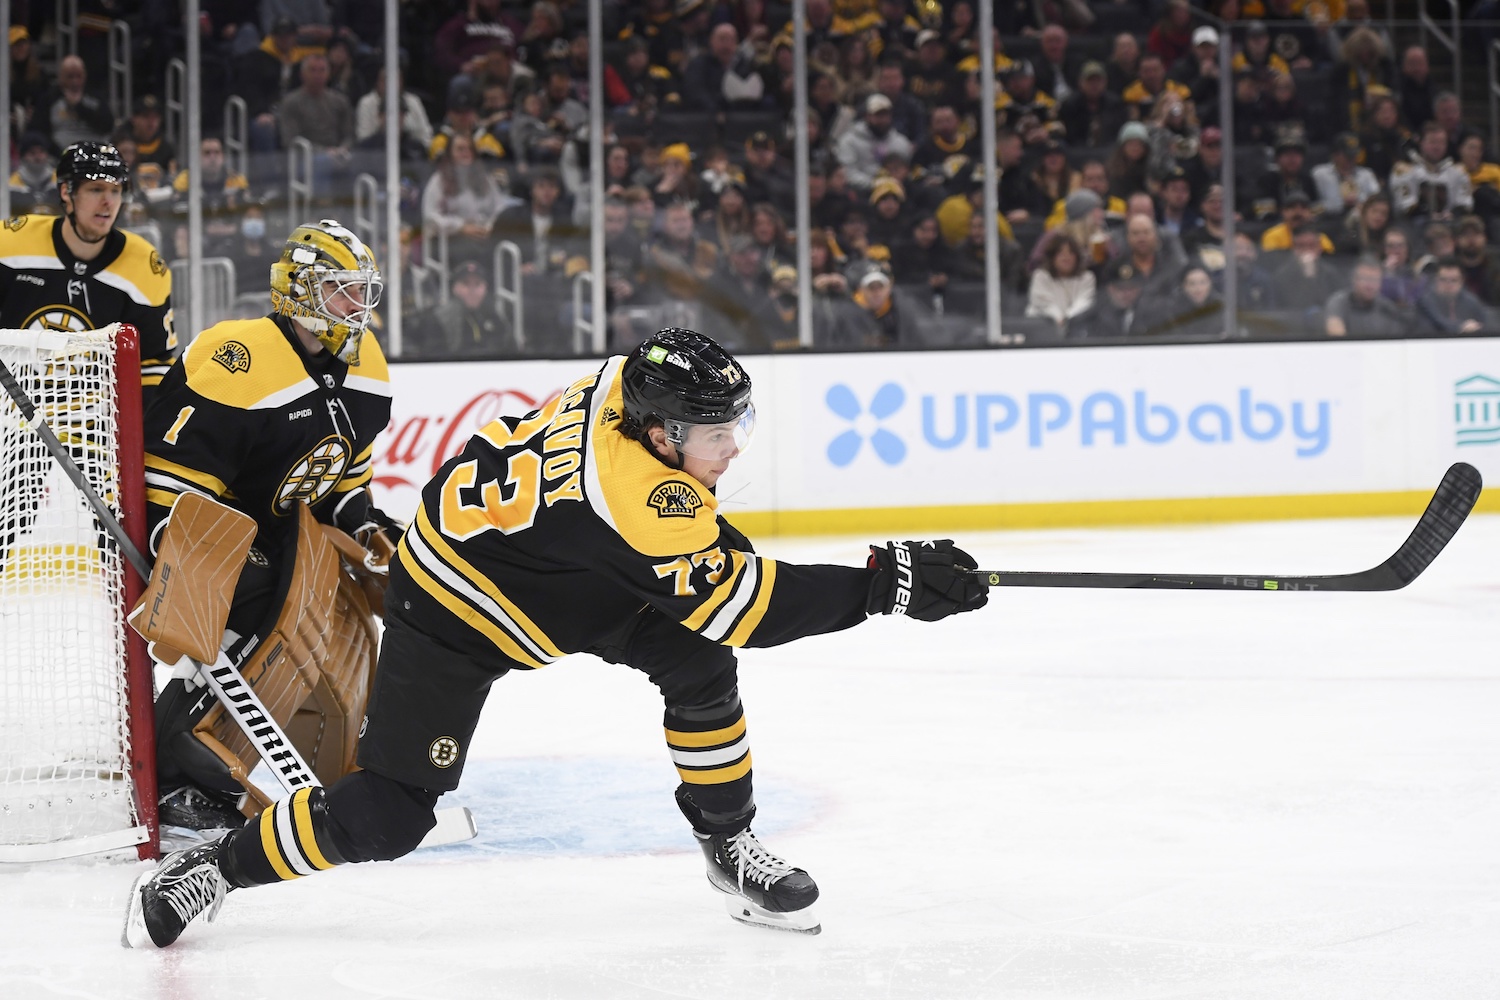 Dec 17, 2022; Boston, Massachusetts, USA;  Boston Bruins defenseman Charlie McAvoy (73) clears the puck out of the zone during the second period against the Columbus Blue Jackets at TD Garden. Mandatory Credit: Bob DeChiara/USA TODAY Sports